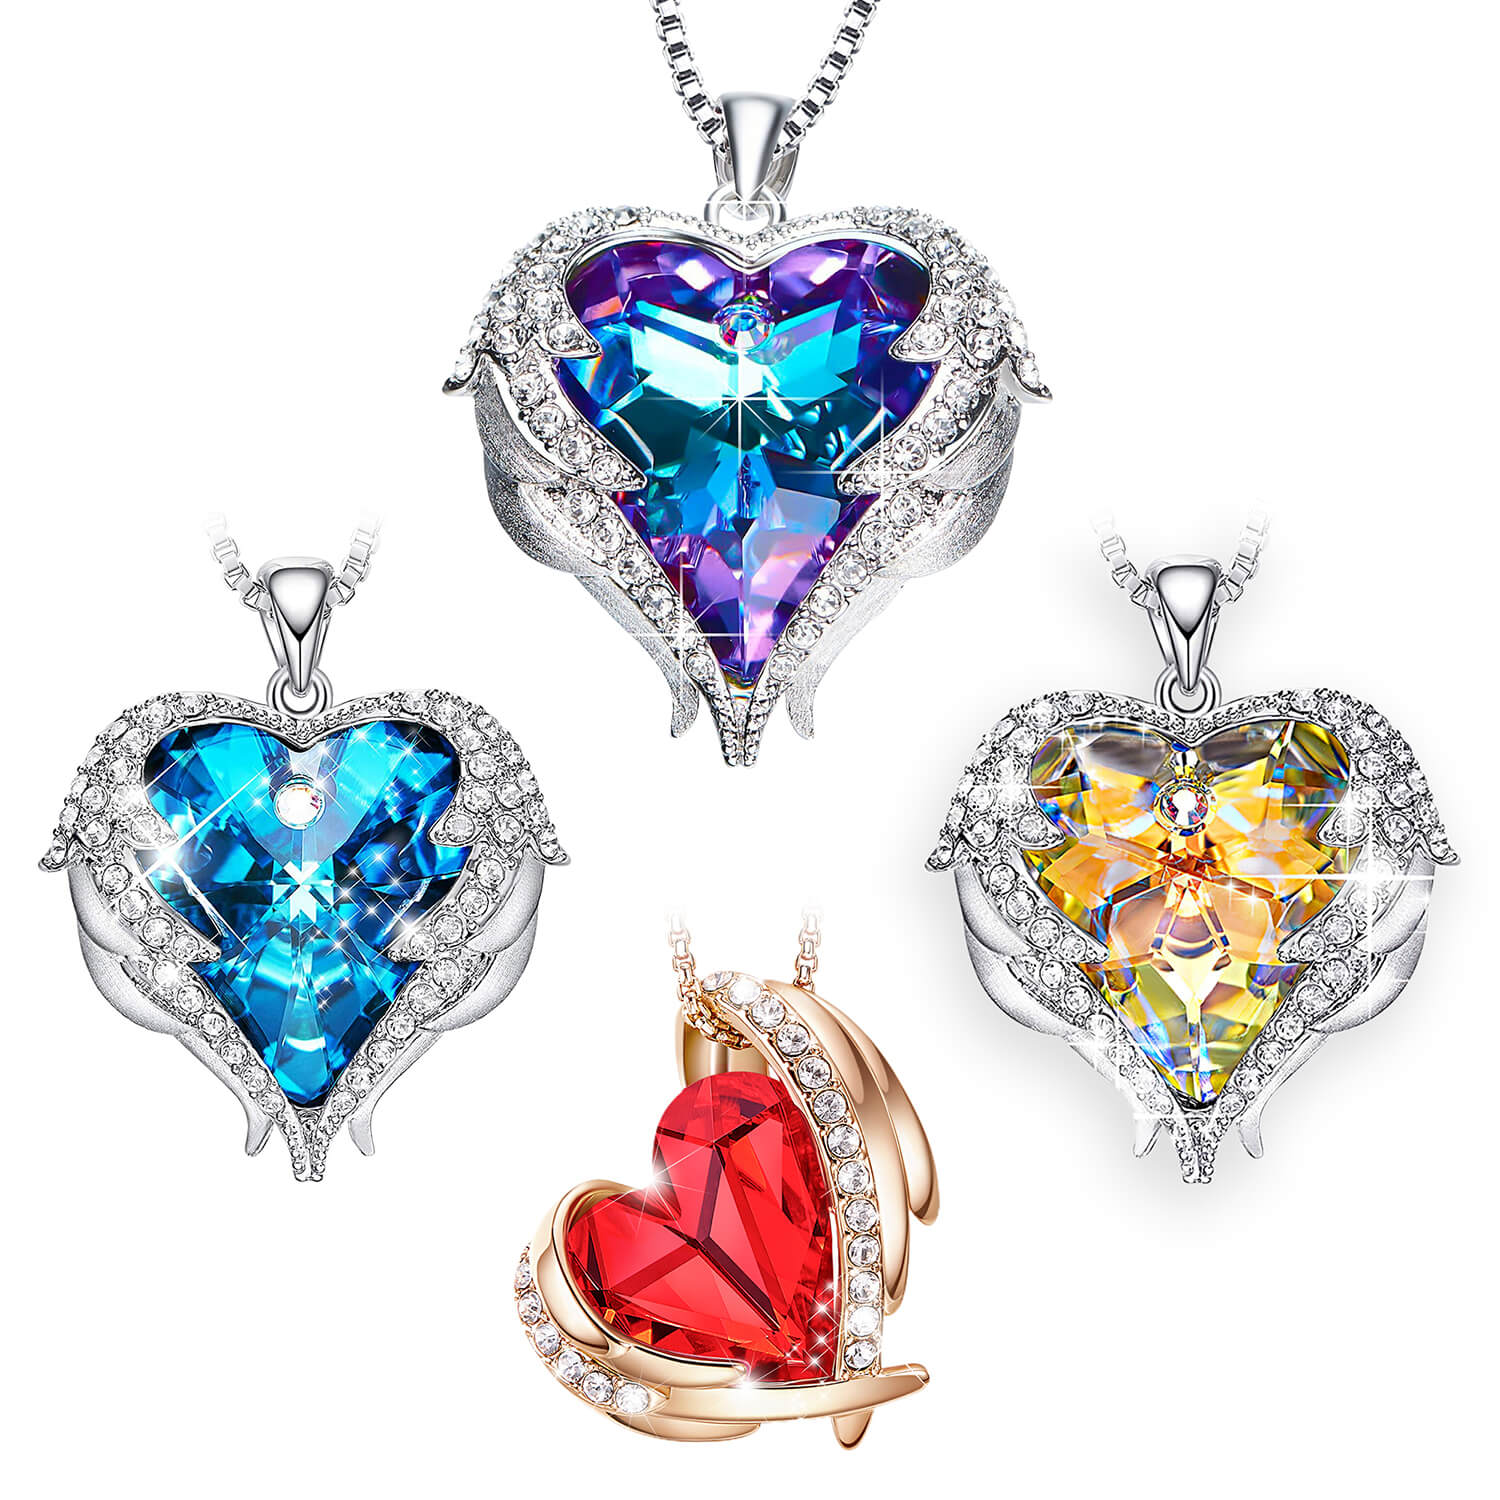 1.Heart AngelWingNecklaces